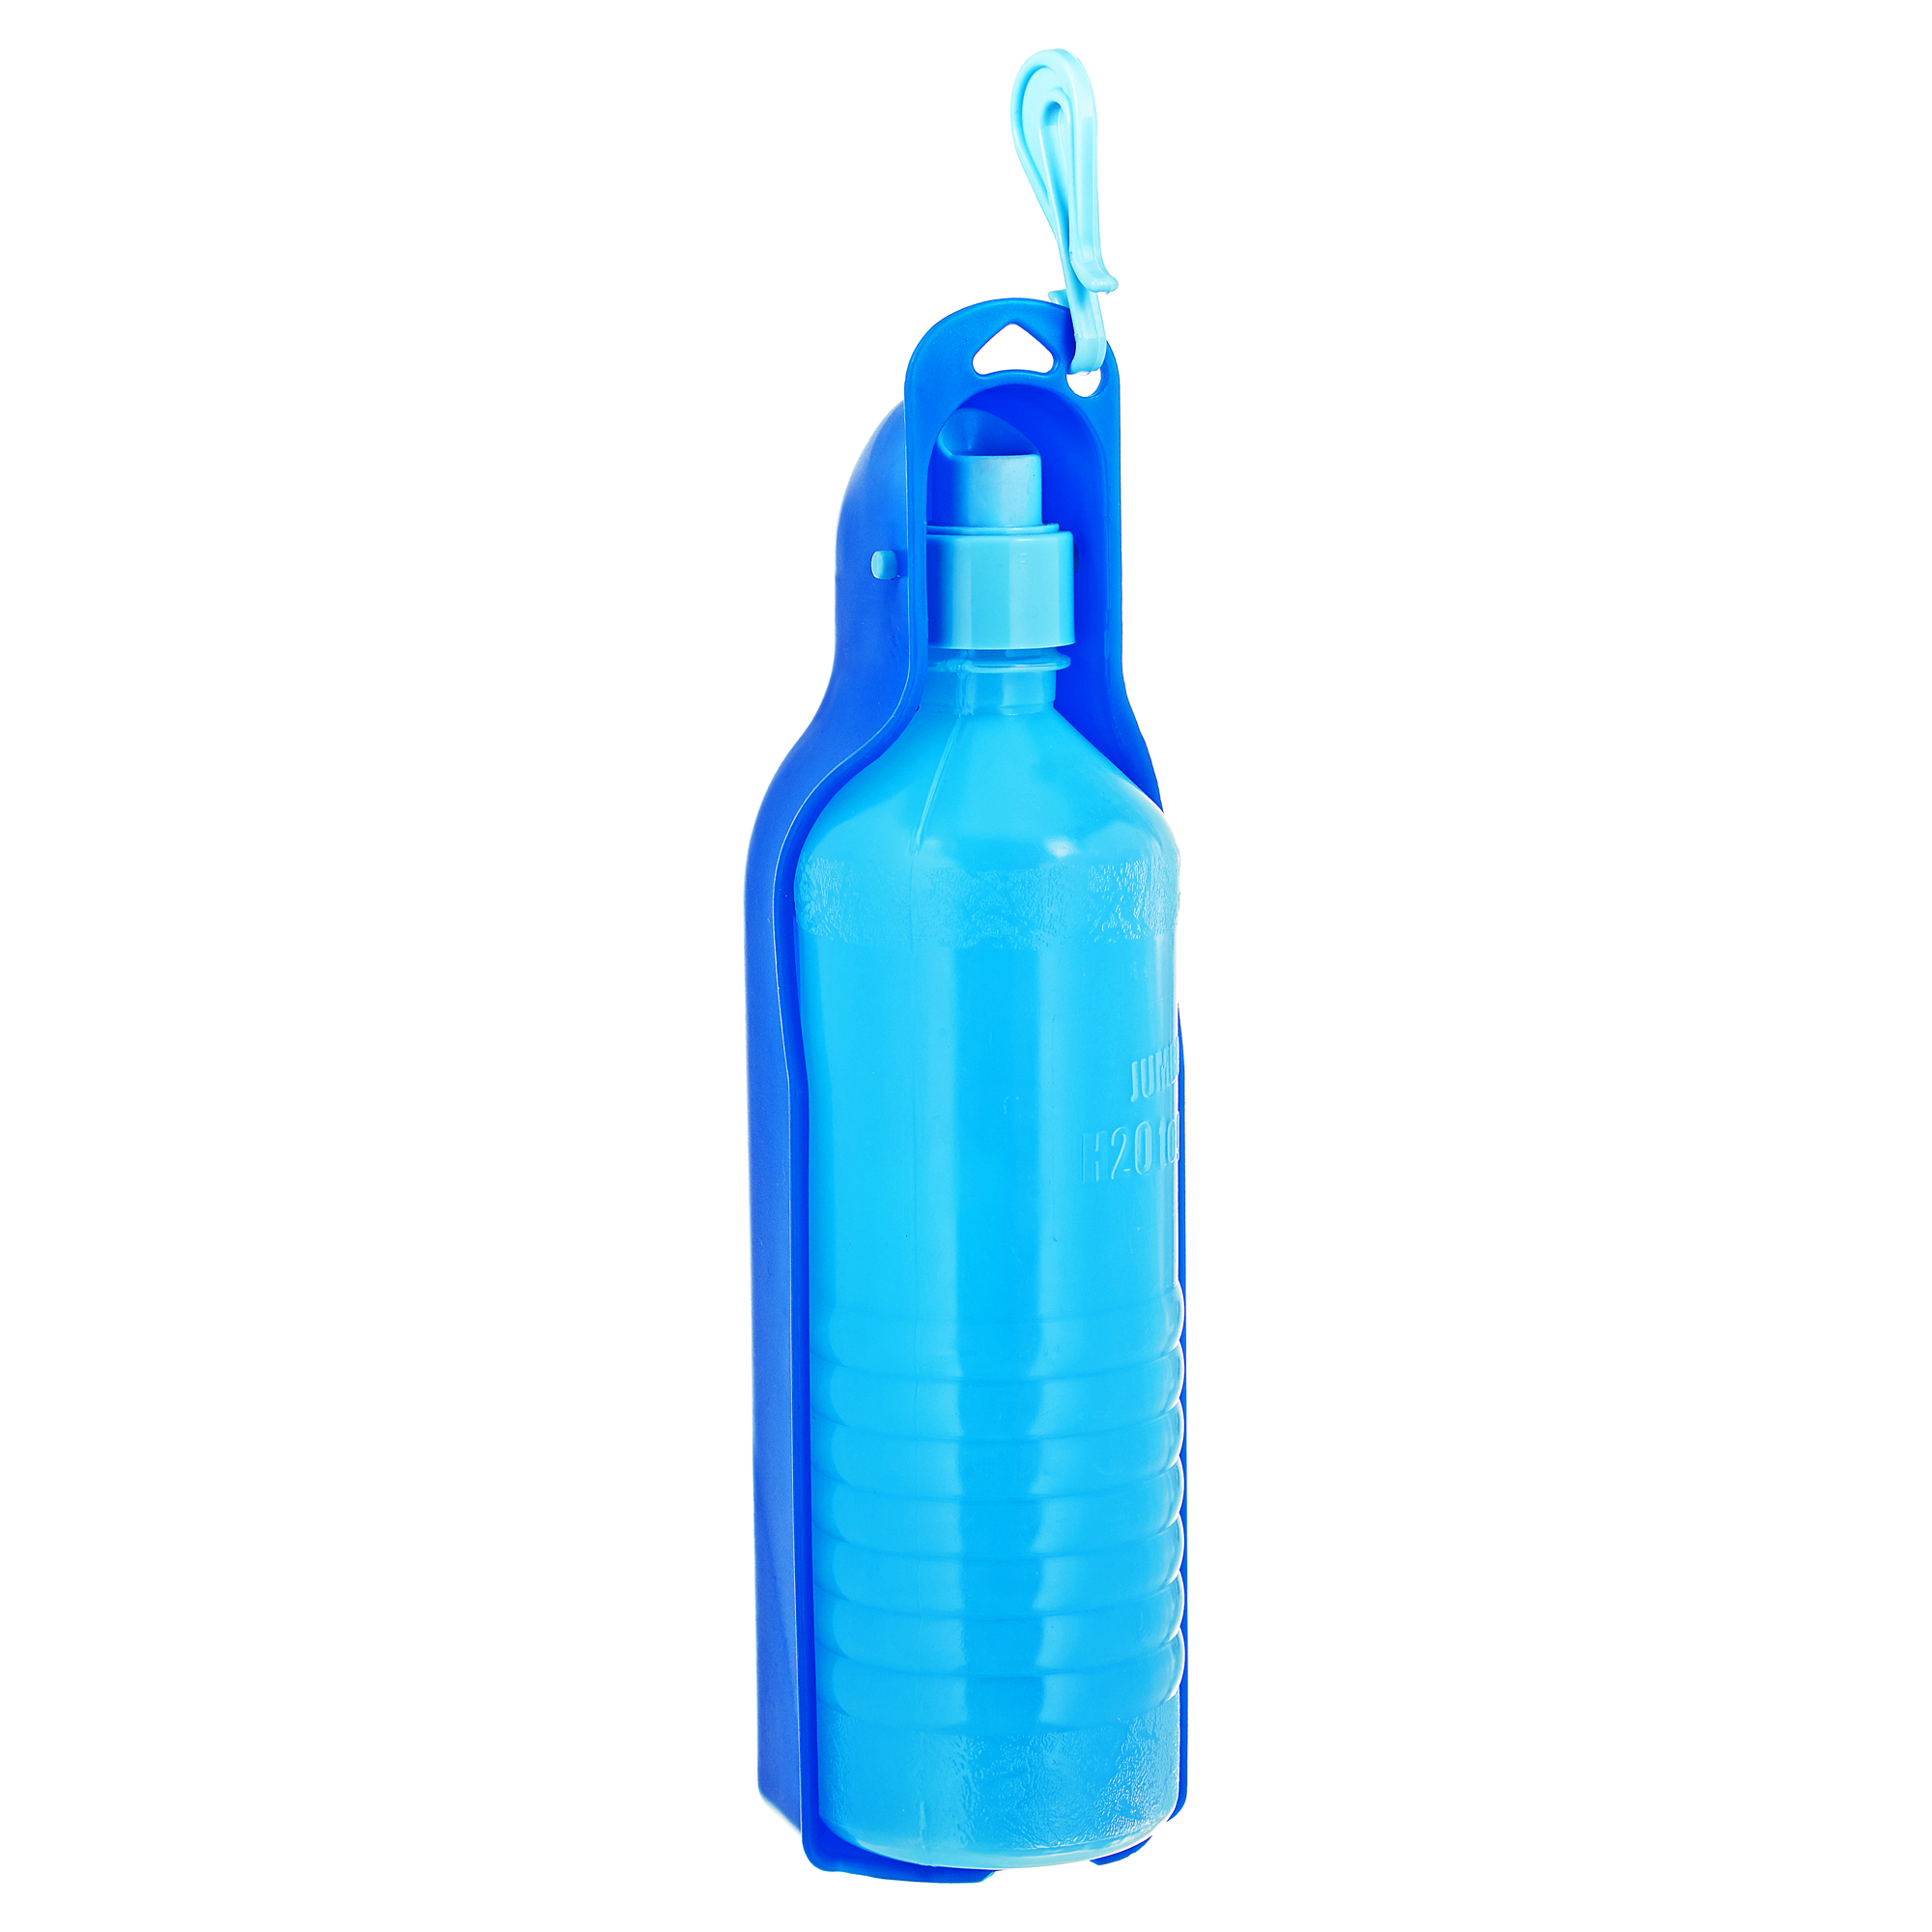 Tragbarer Wasserspender "H2O to go" 0,5 l + product picture